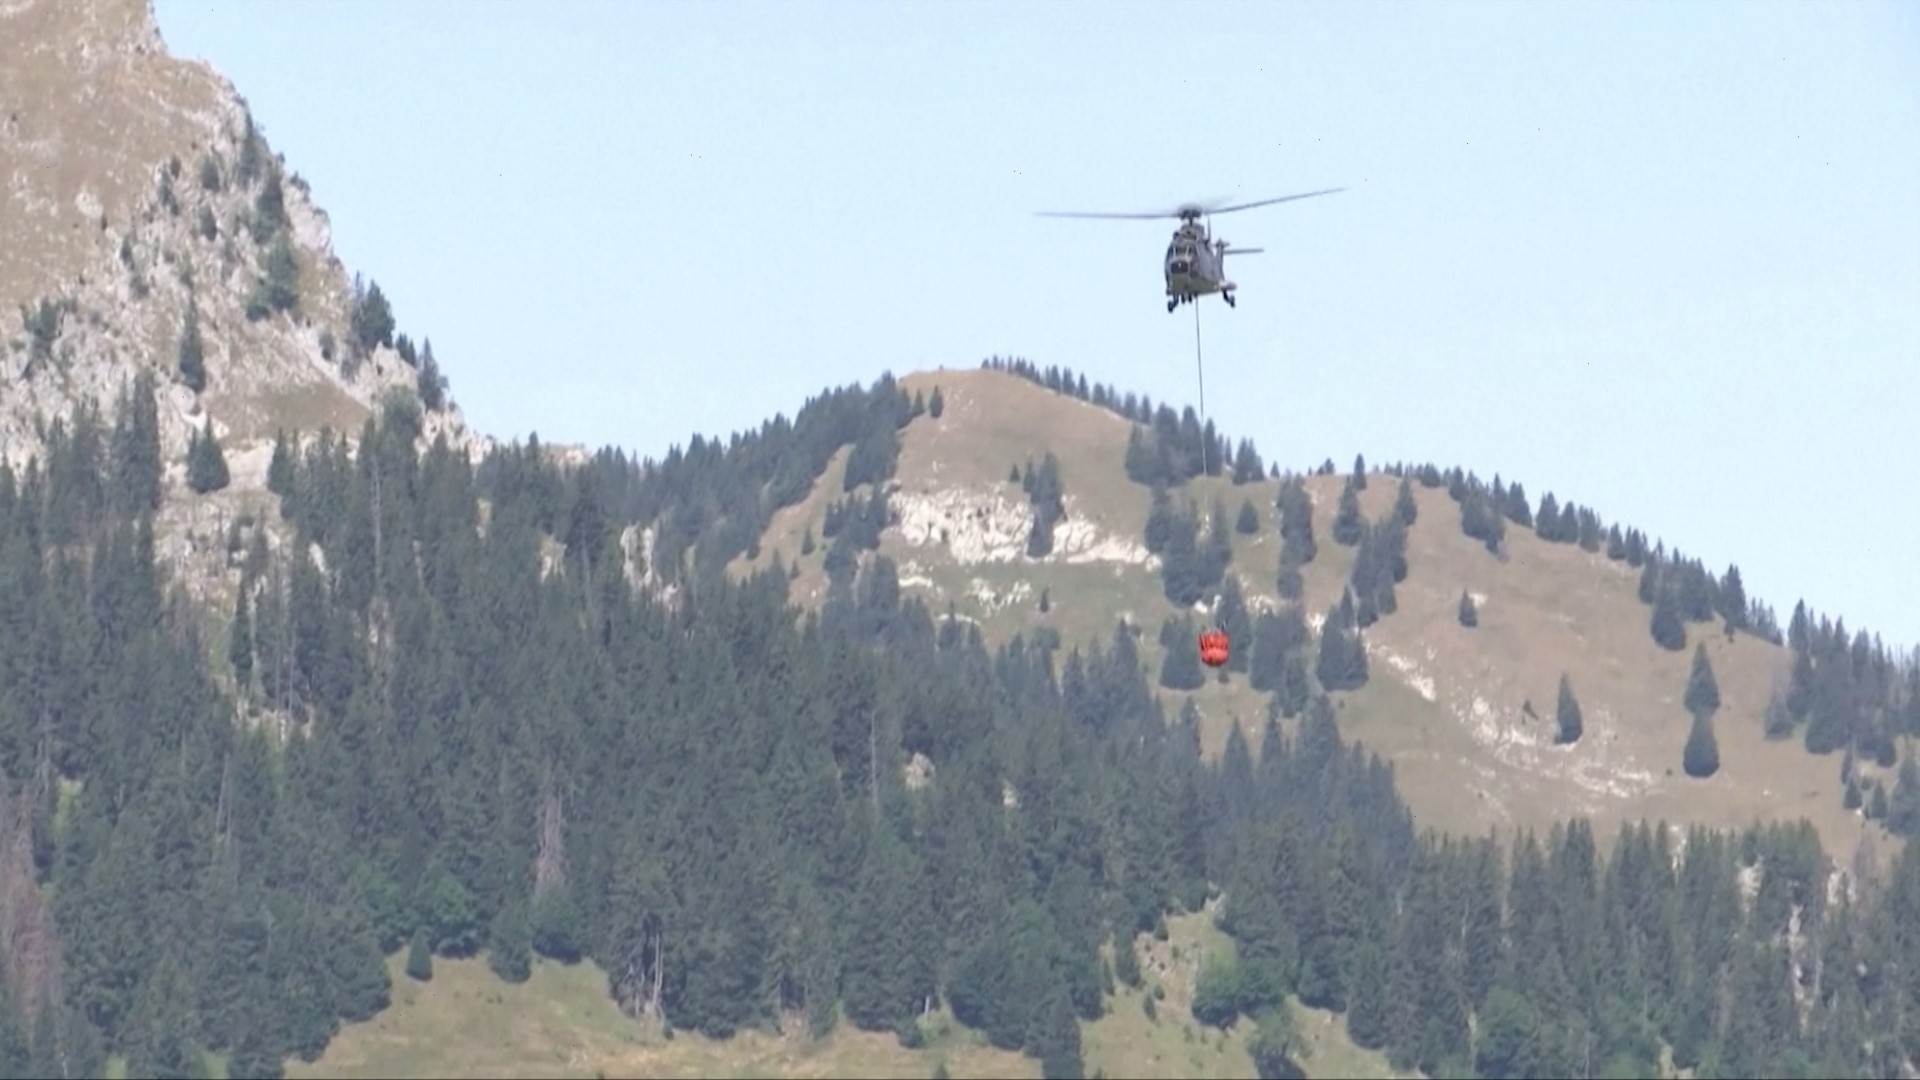 Swiss army helicopters are airlifting water to thousands of thirsty farm animals sweltering under this summer's high temperatures in the Alpine meadows. Buzz60's Johana Restrepo has more.